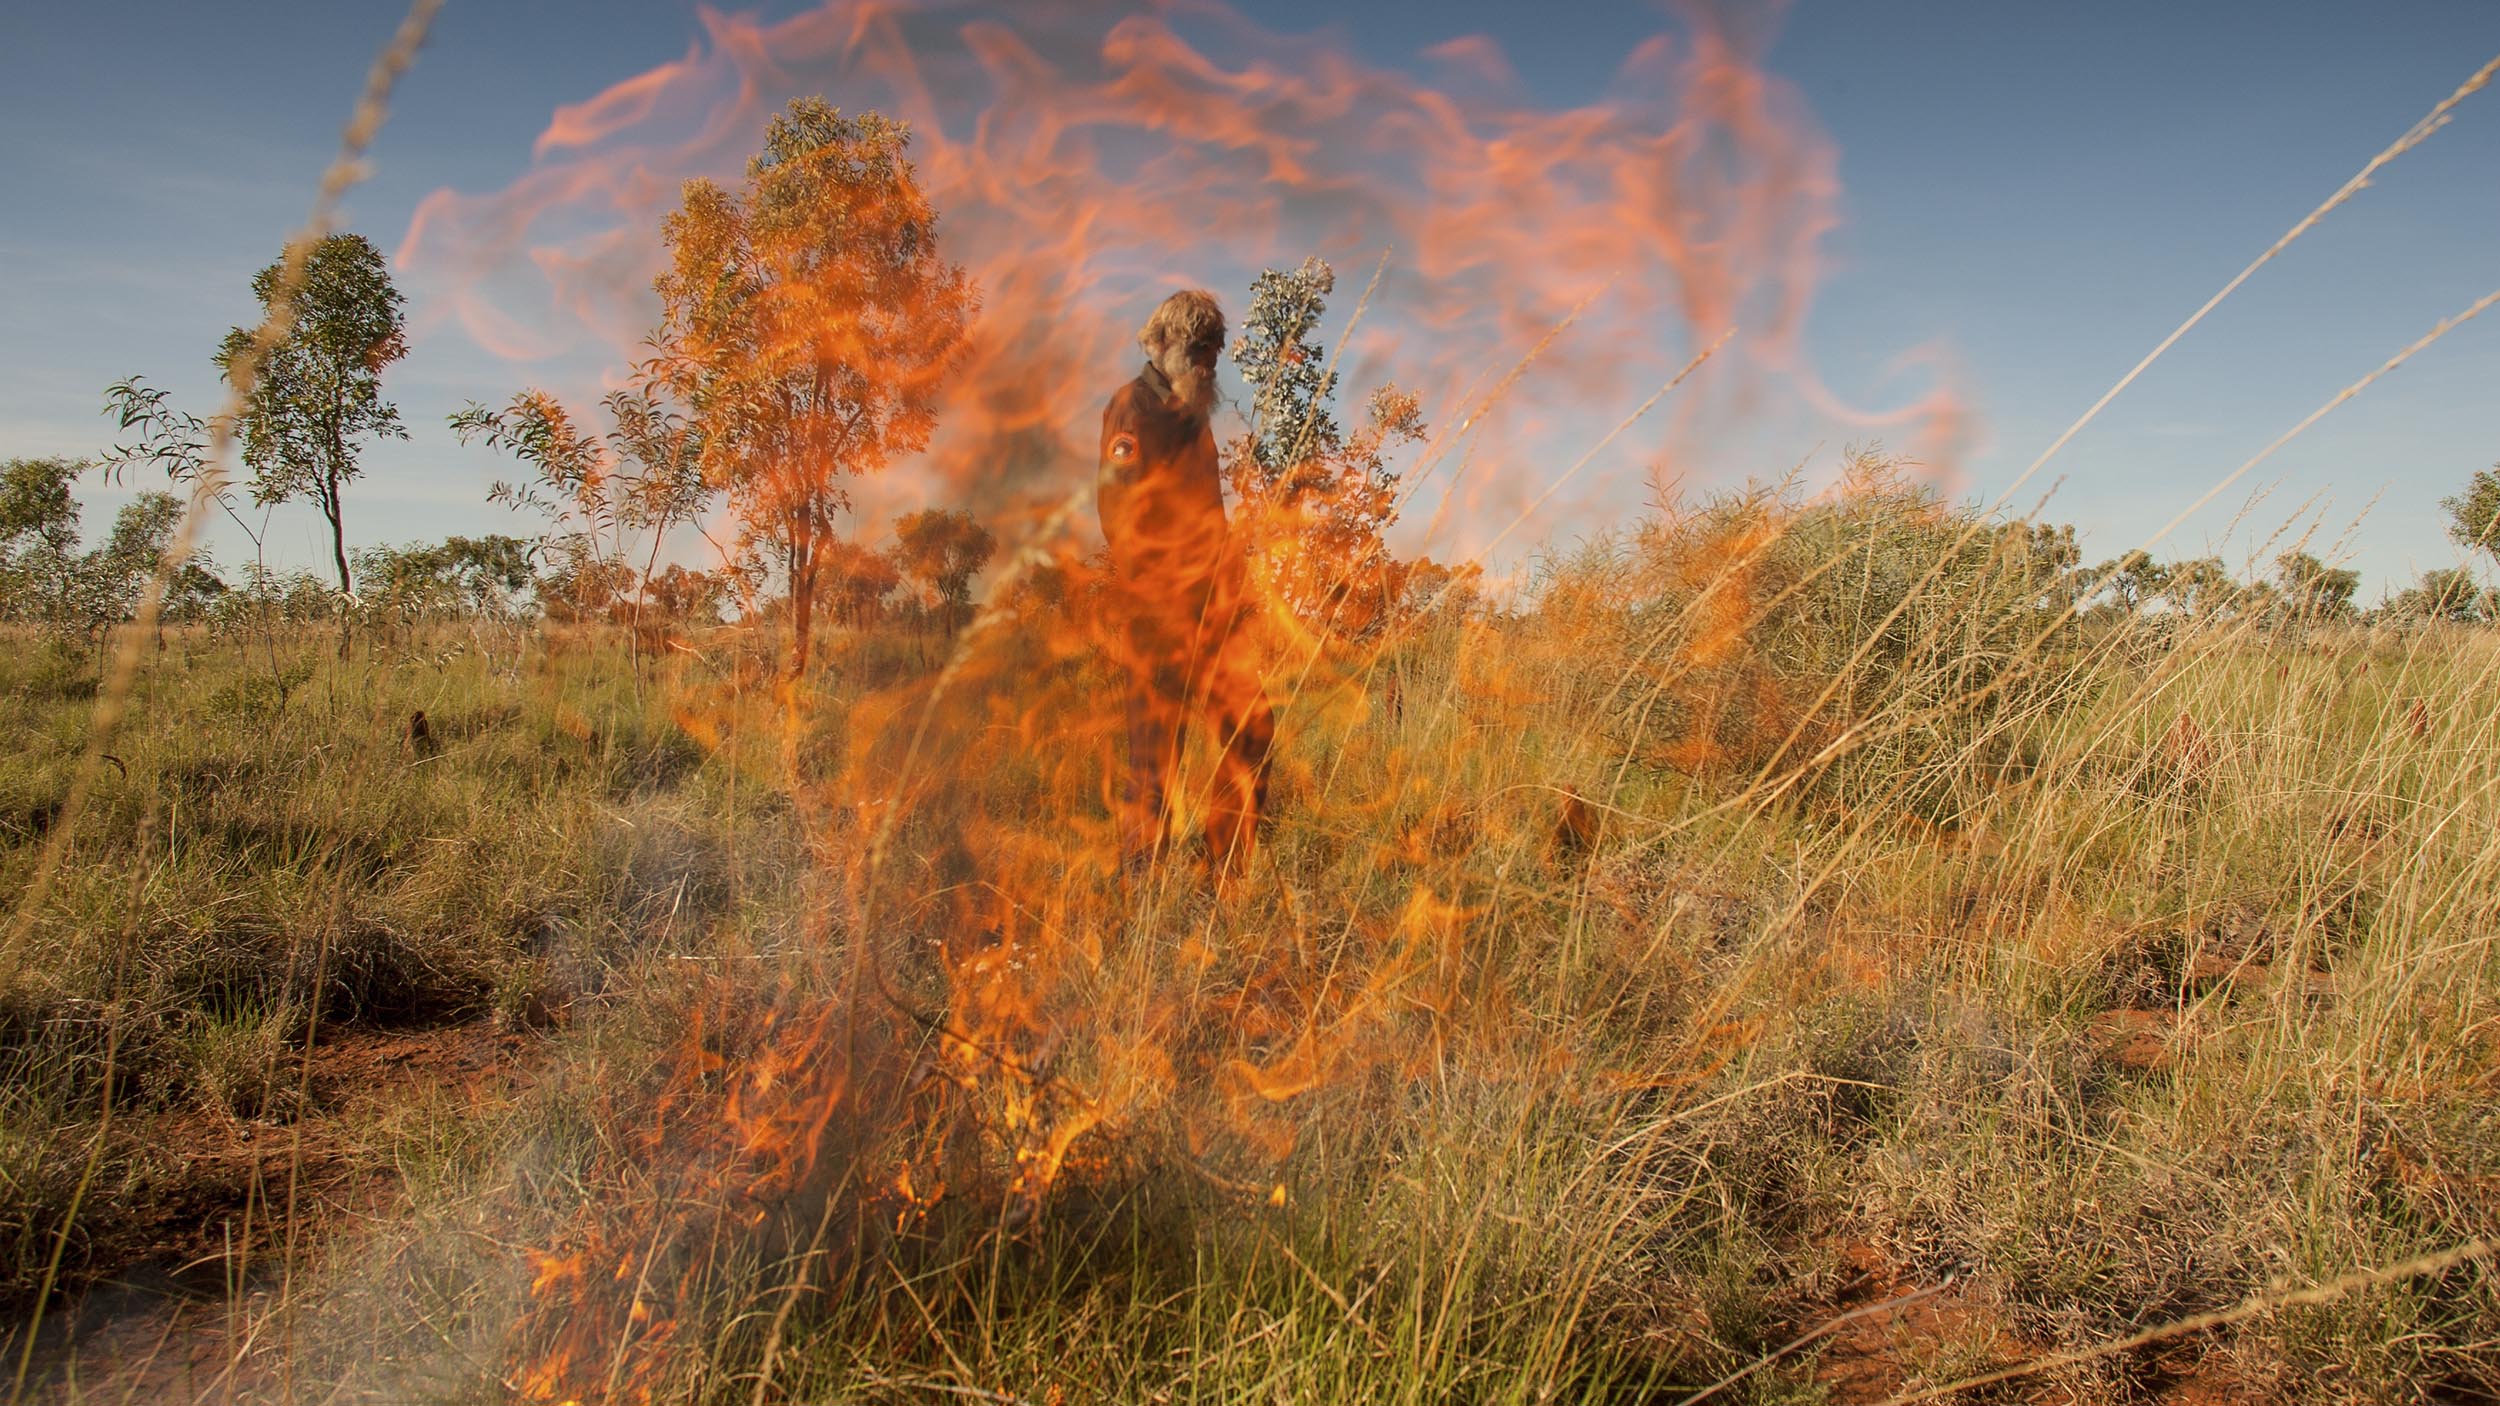 Indigenous Ranger Benny Jabbalari conducts a controlled burn in spinifex country in the Northern Territory’s Tanami Desert. The Tanami comes under two Indigenous Protected Areas, with rangers working to manage threats such as wildfires, weeds and feral animals.